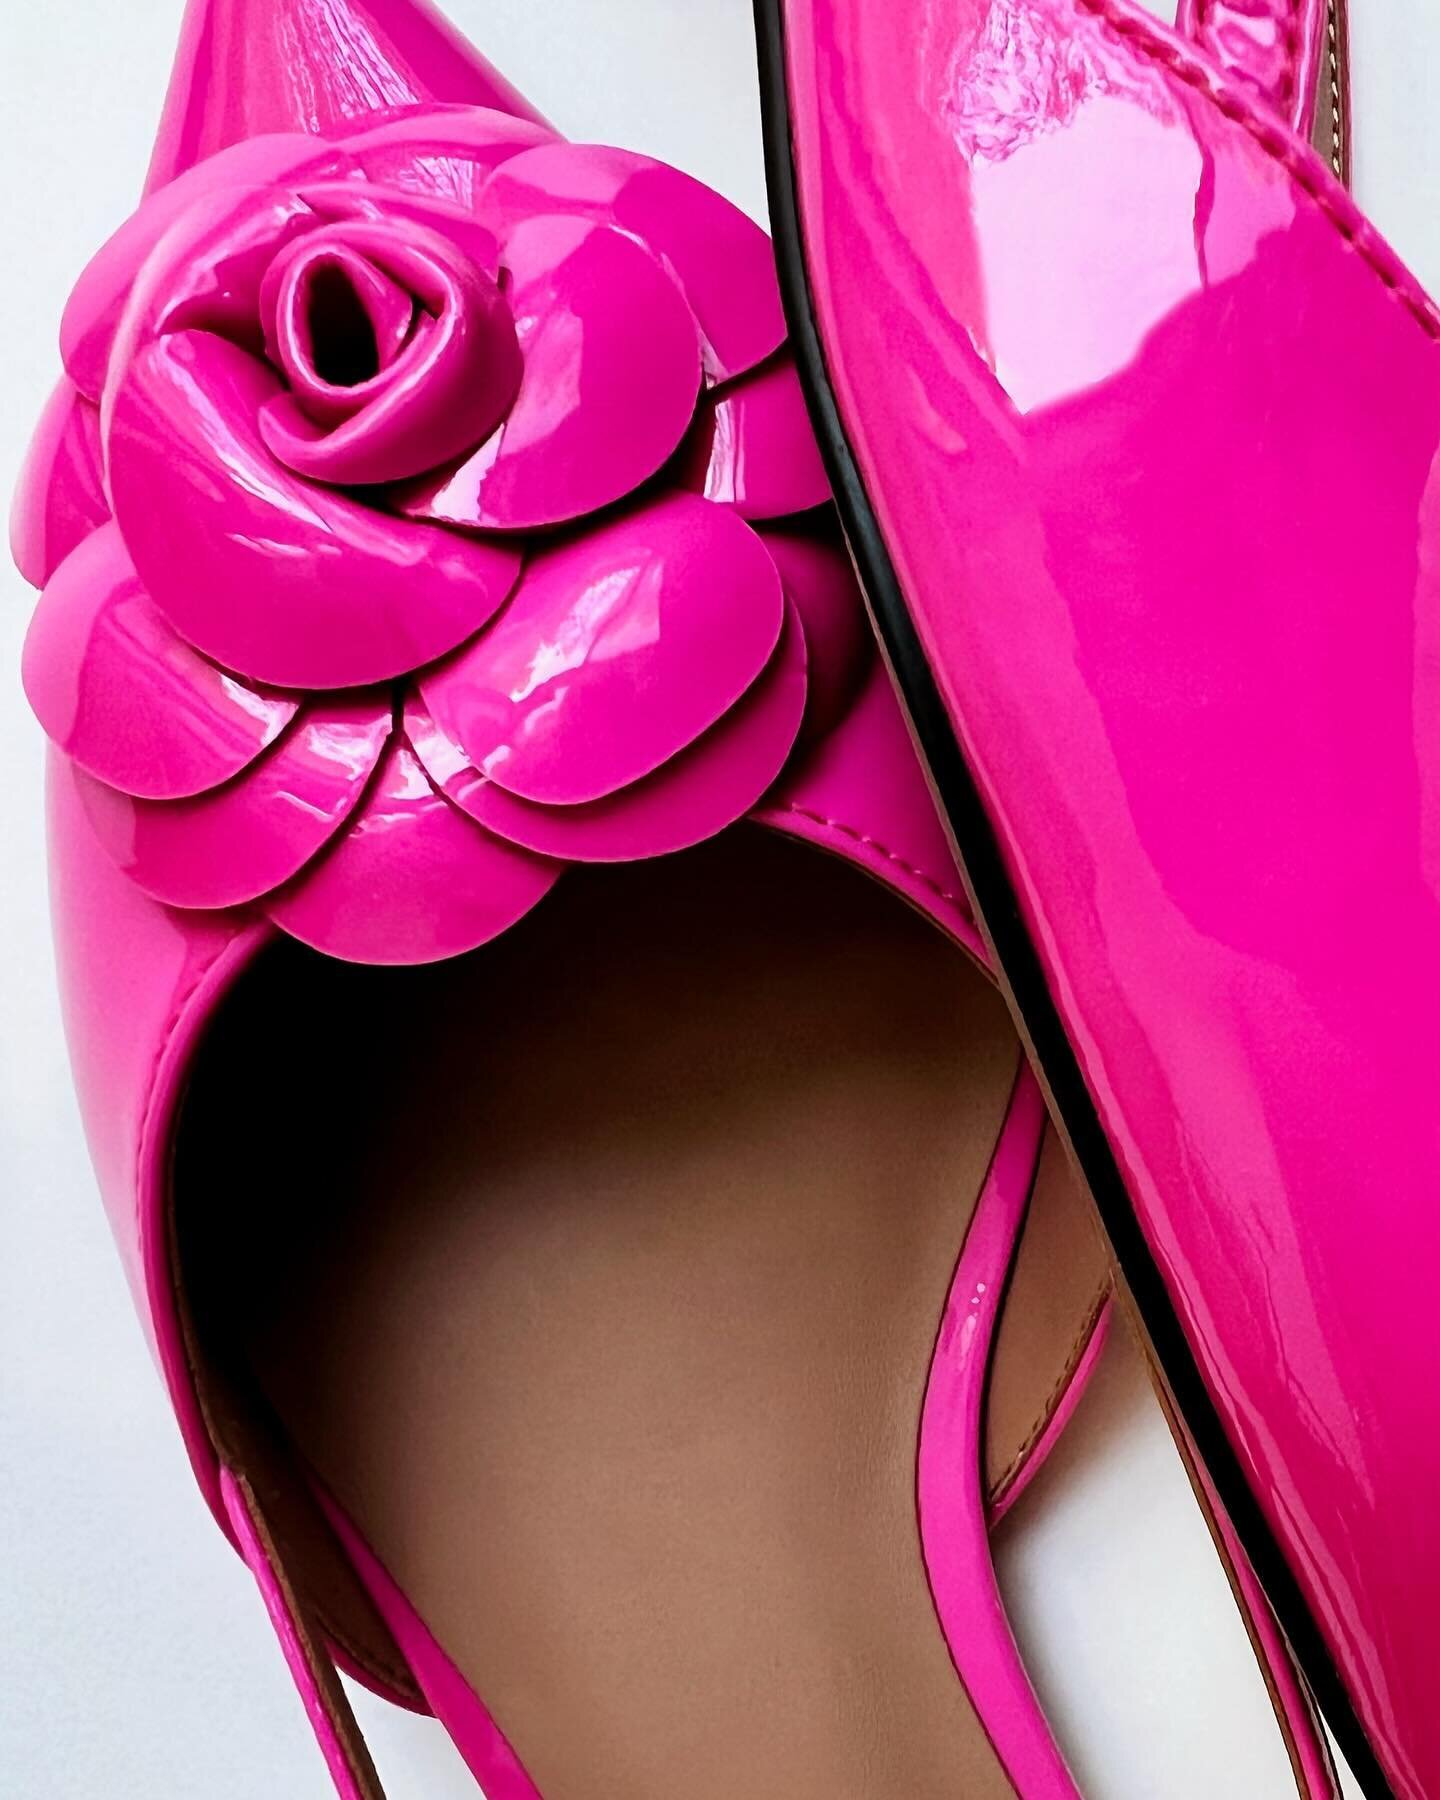 New Work just in time for Valentine&rsquo;s Day @lineapaoloshoes